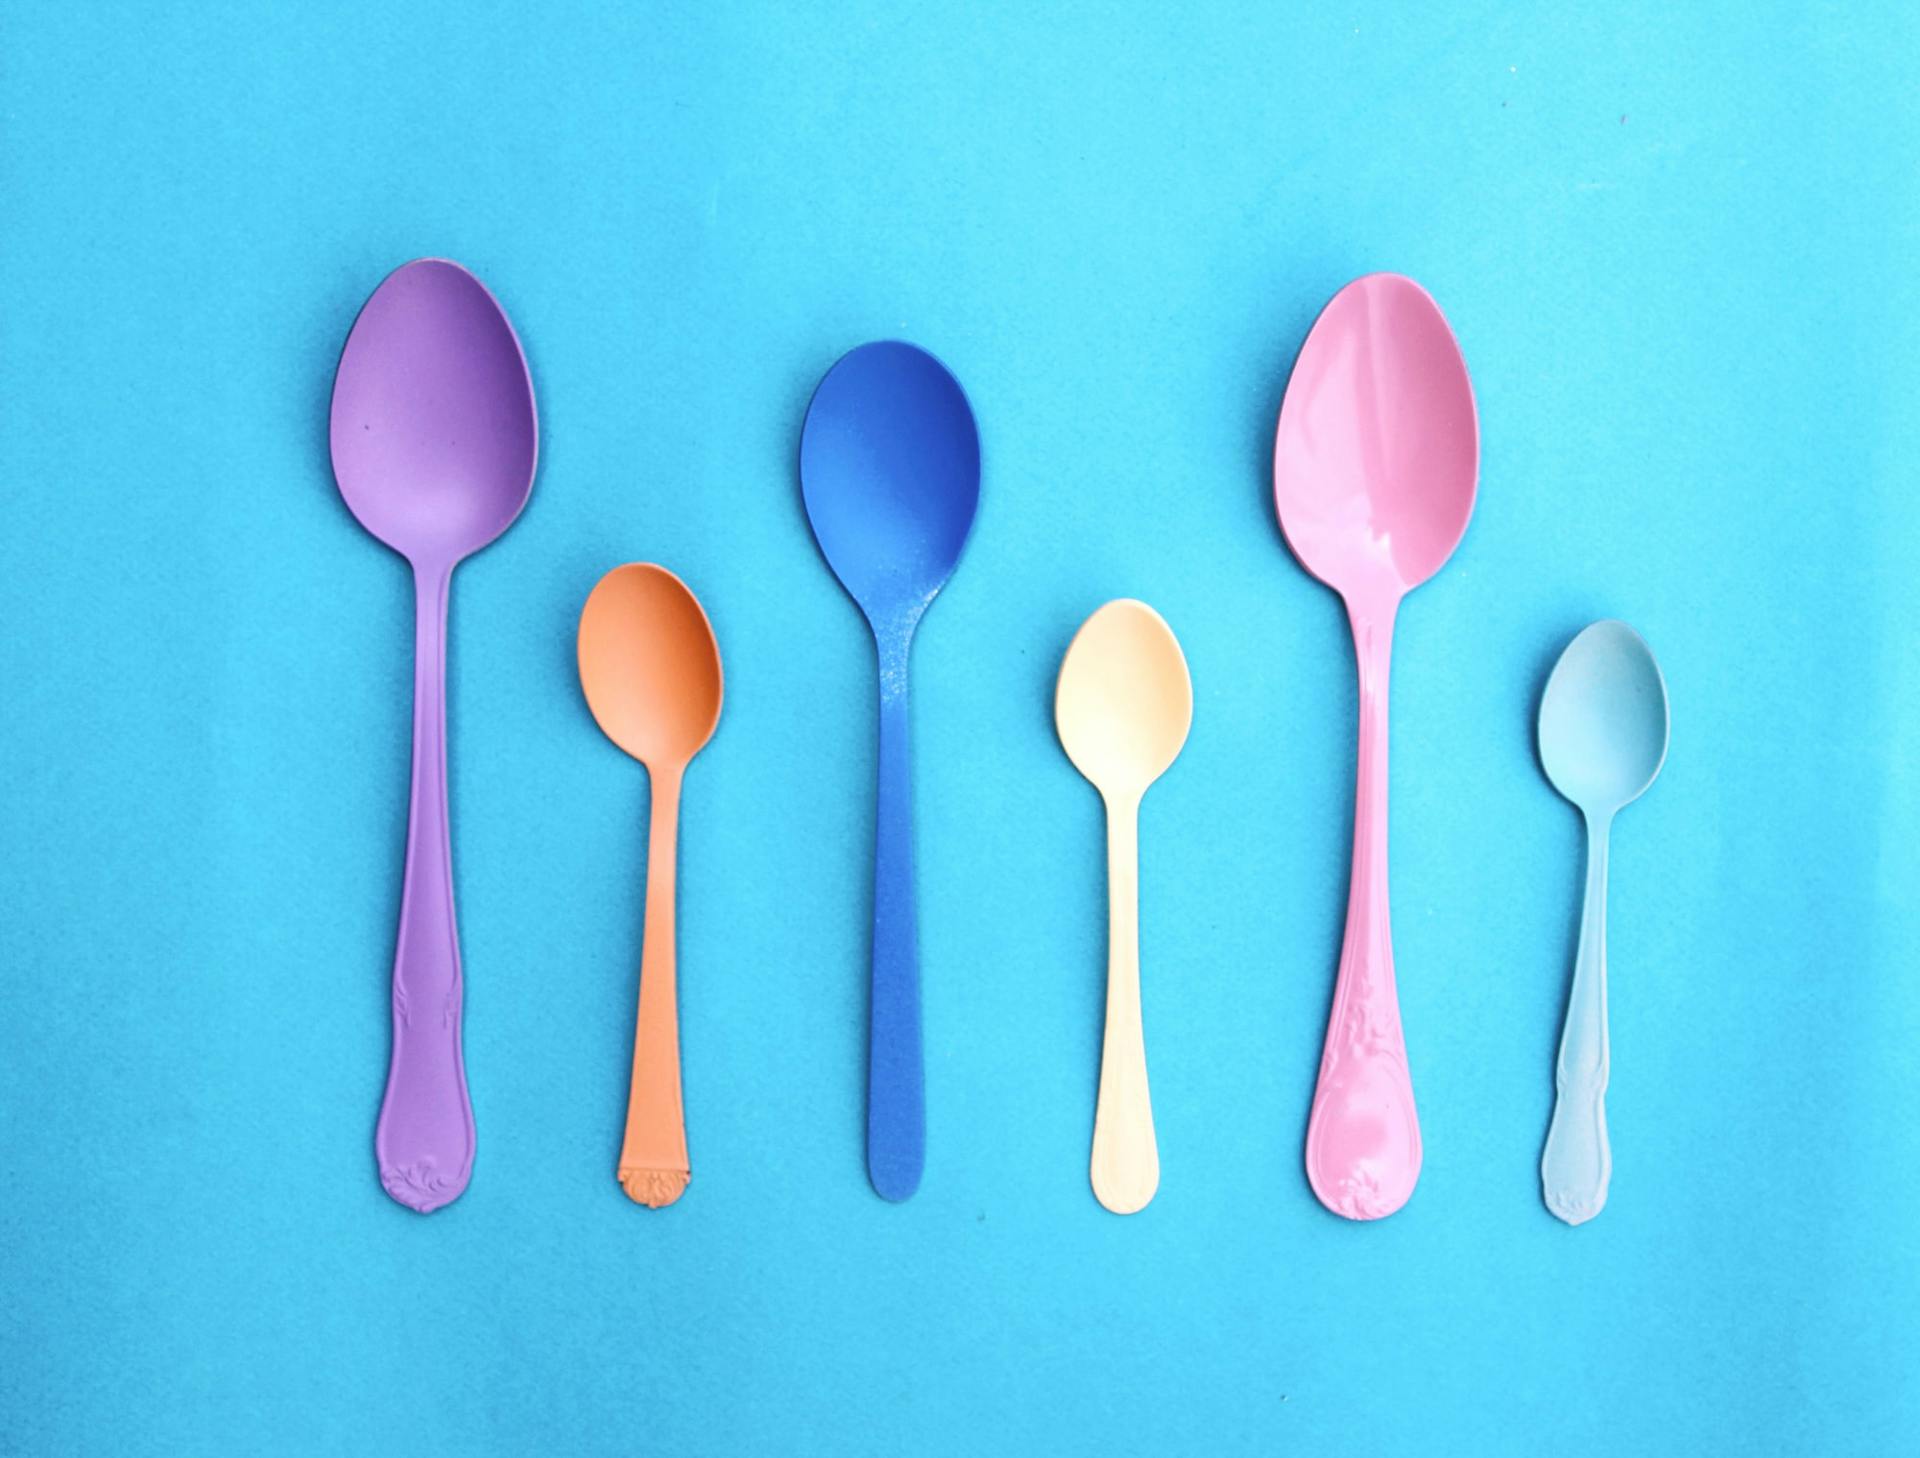 What is Spoon Theory?